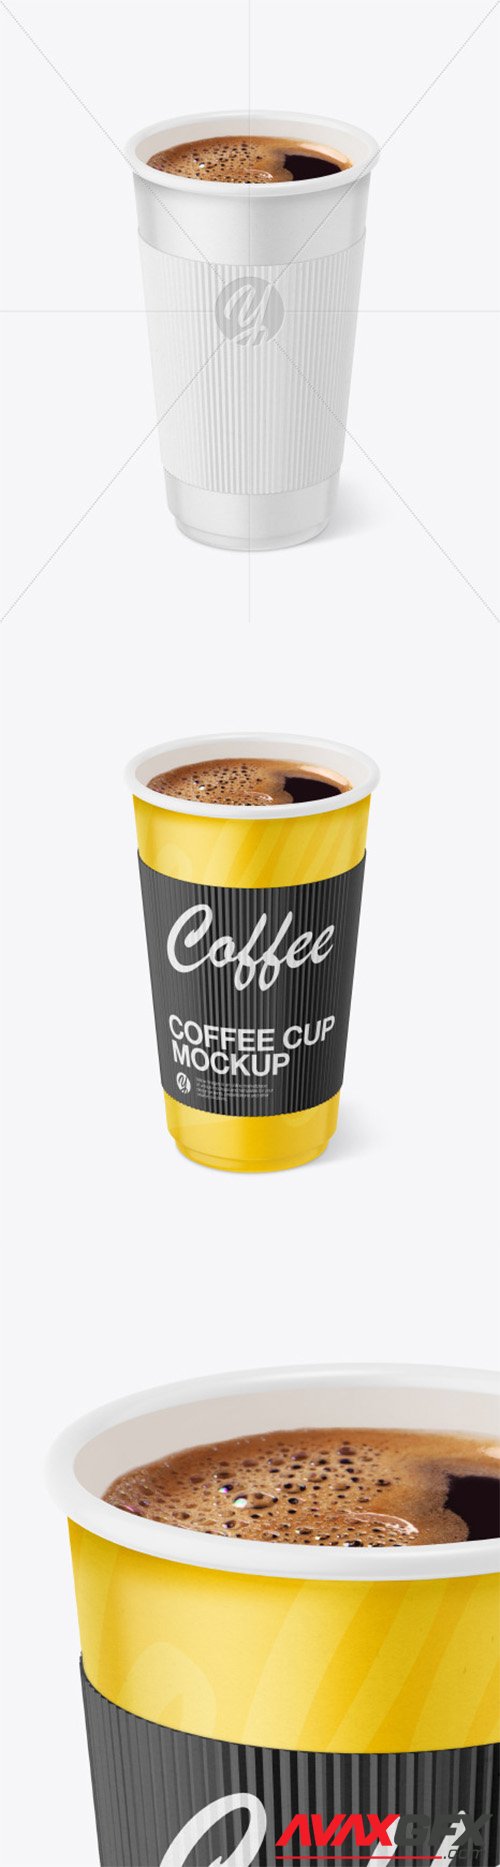 Paper Coffee Cup With Holder Mockup 78700 TIF